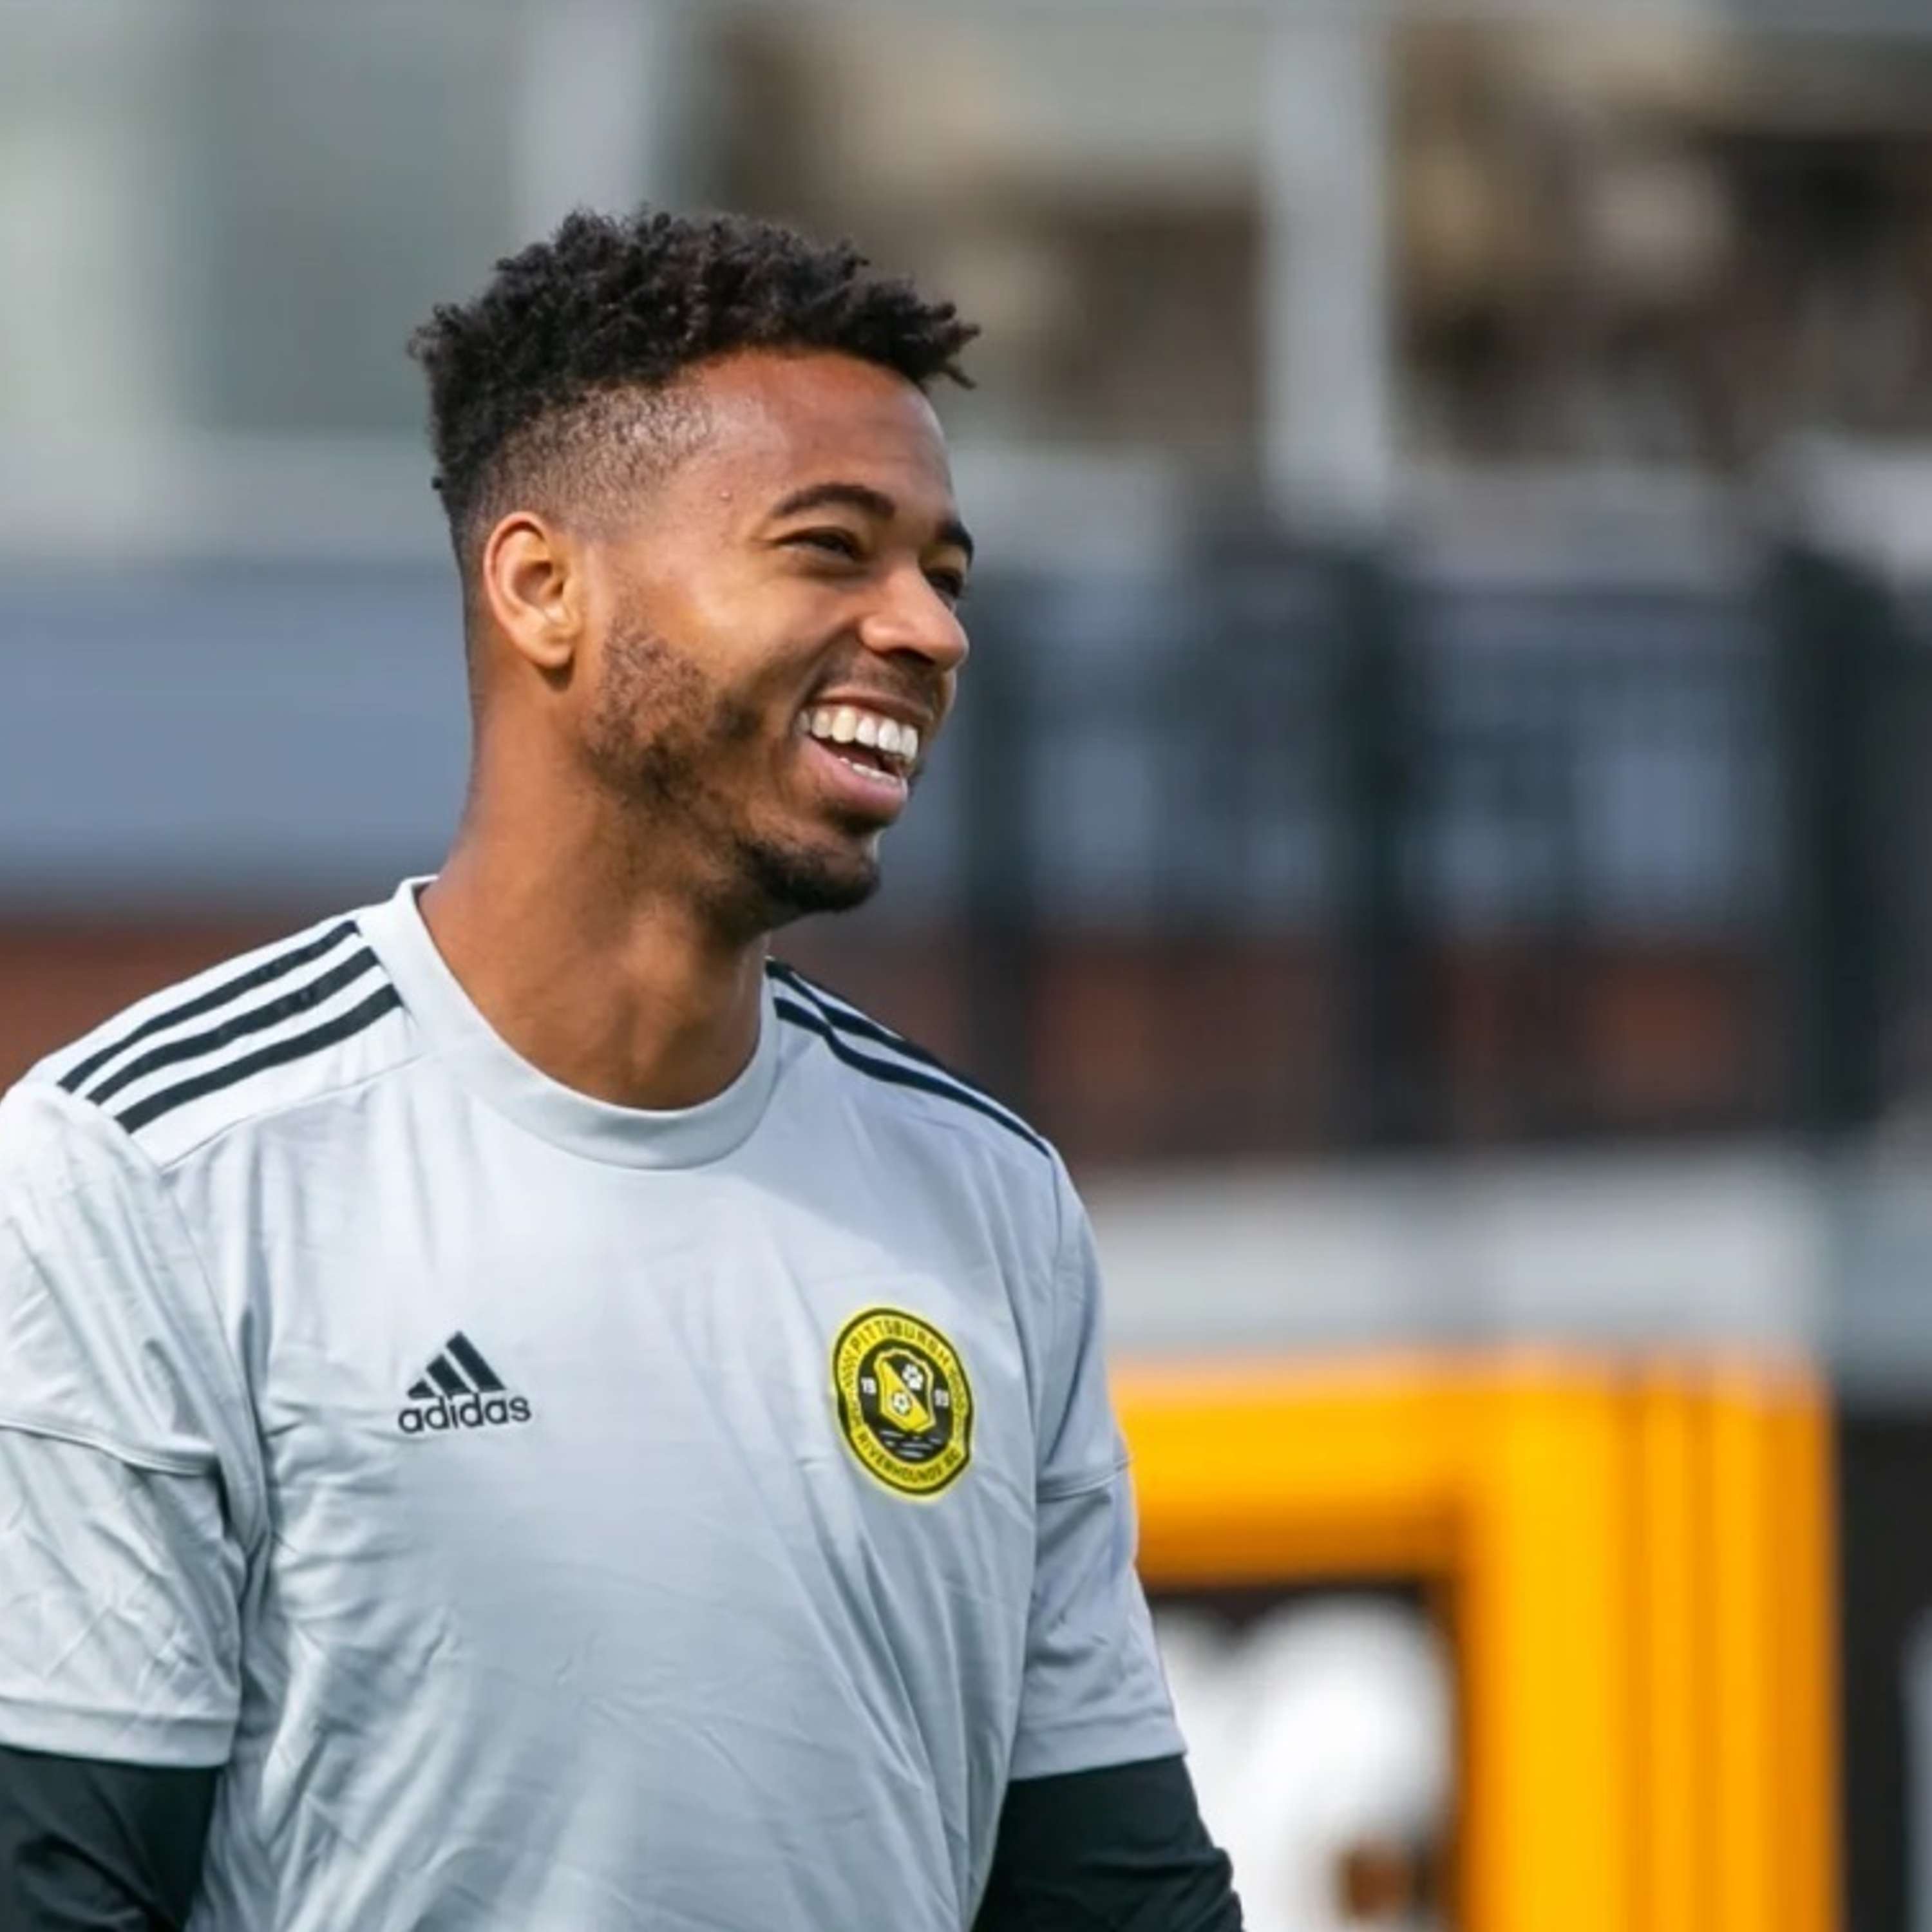 Catching up with Riverhounds' Langston Blackstock